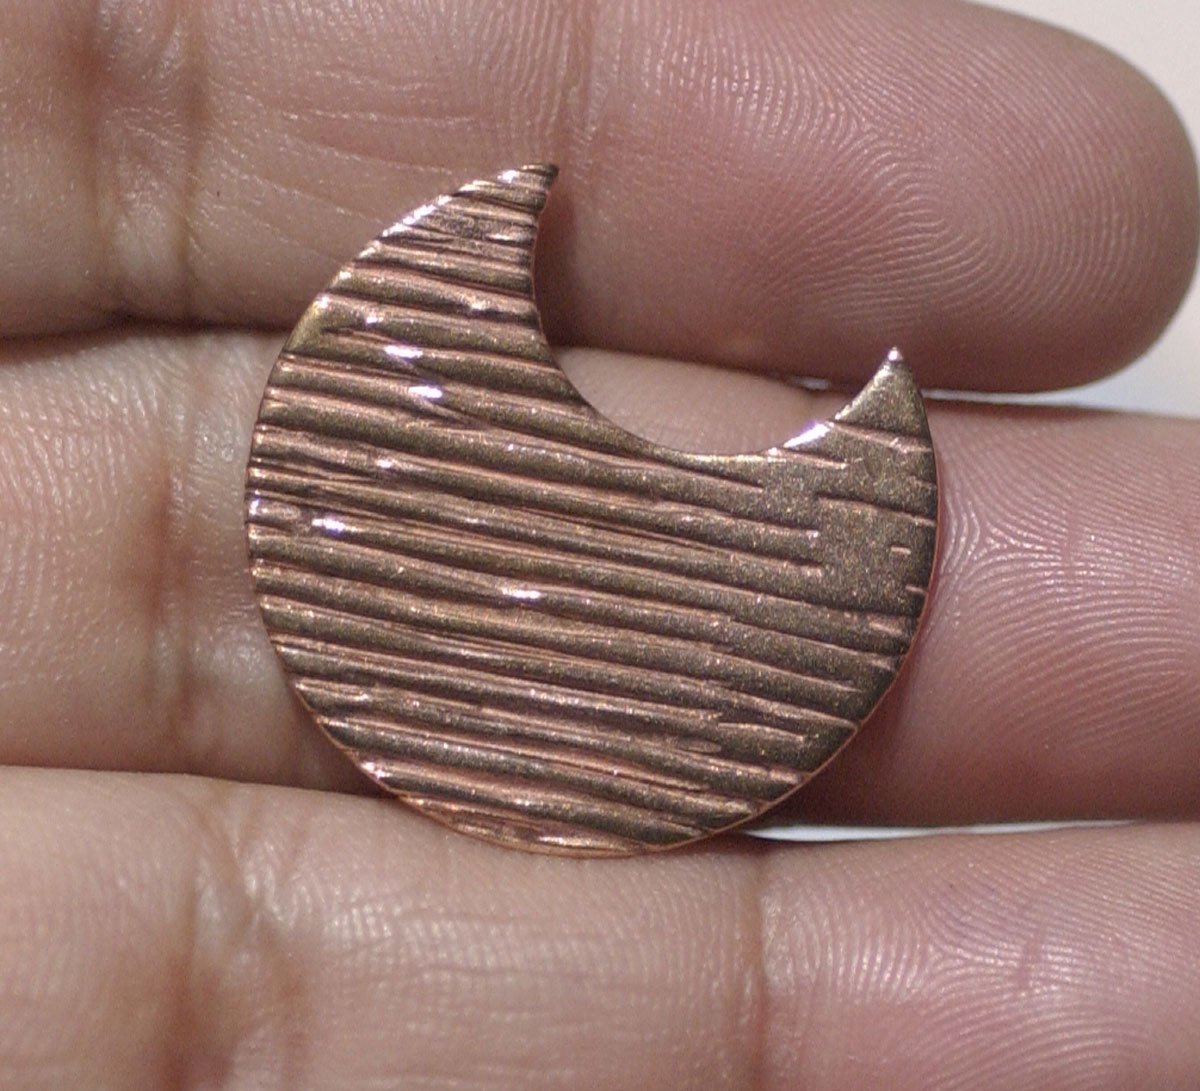 Woodgrain Pattern Moon 22mm x 24mm Blanks Cutout for Enameling Stamping Texturing Variety of Metals